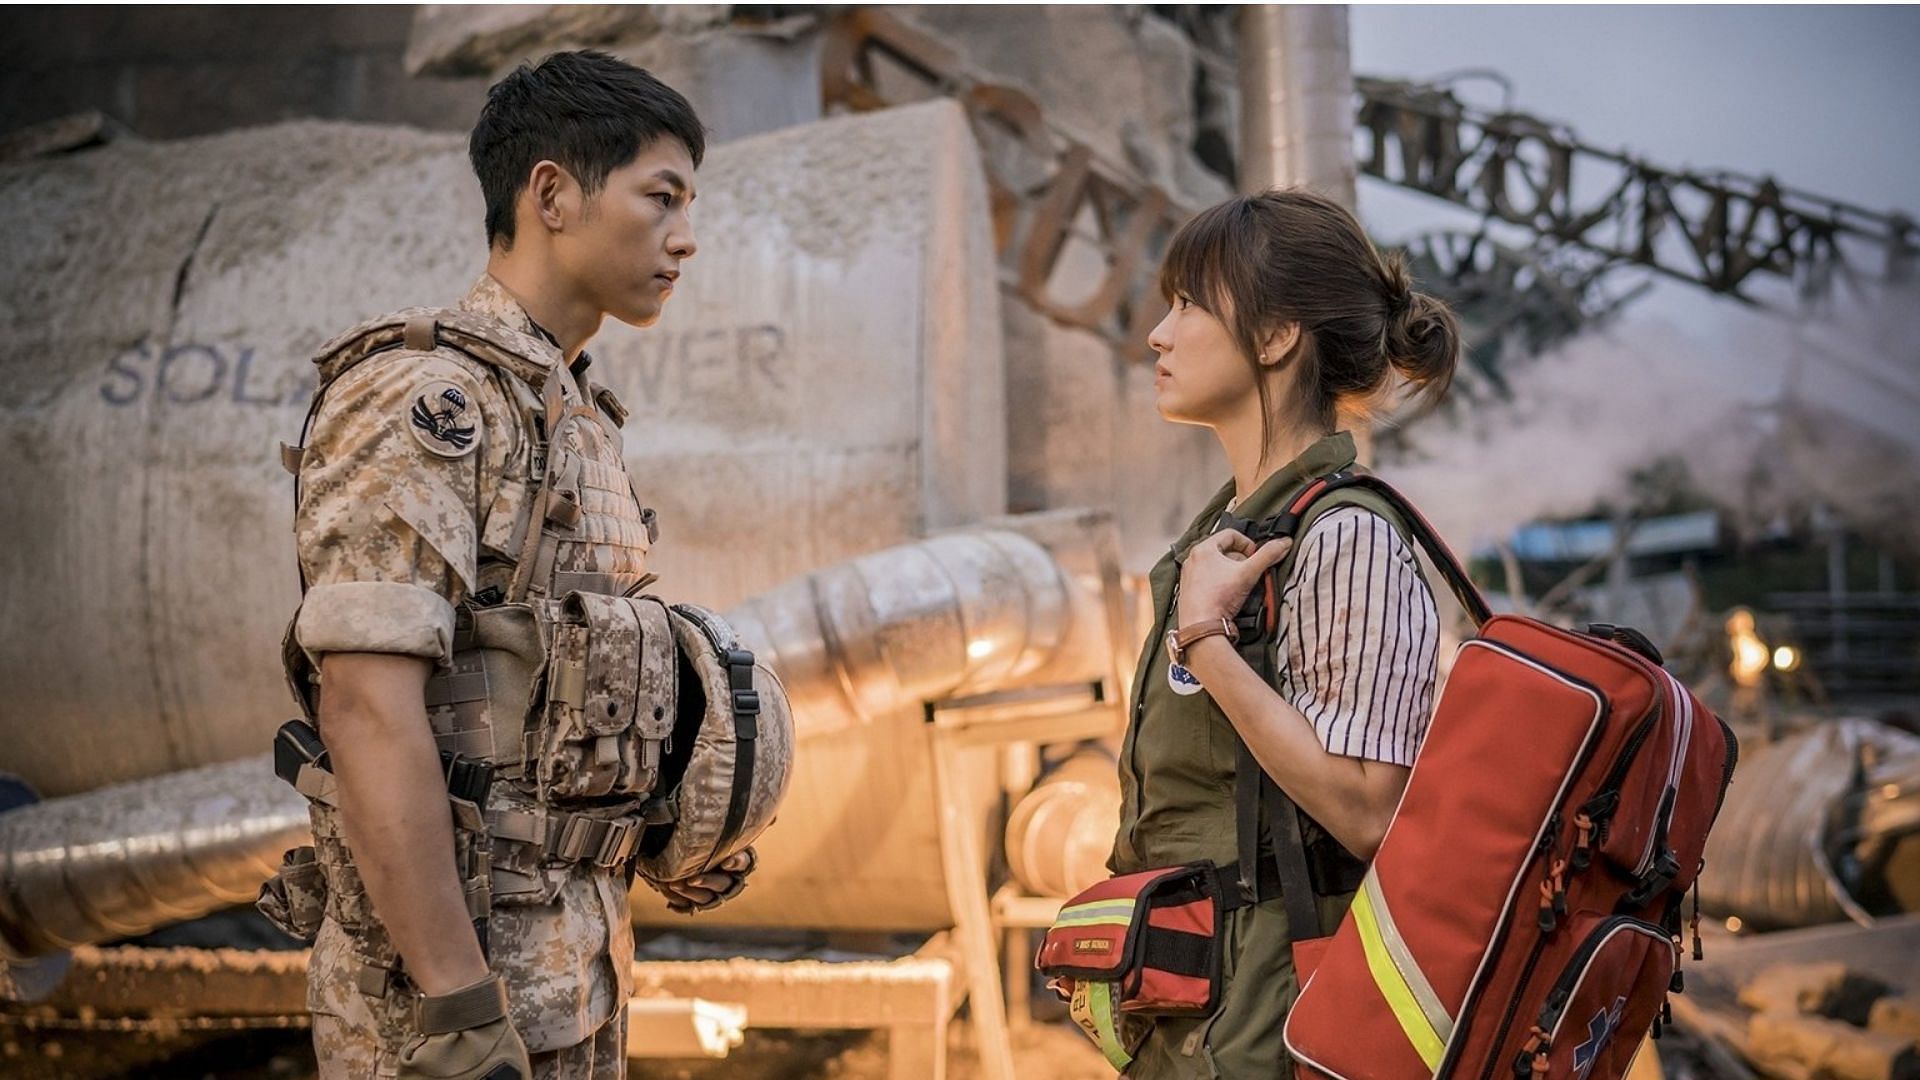 Song Joong-ki and Song Hye-kyo from a still of Descendants in the Sun, facing each other.